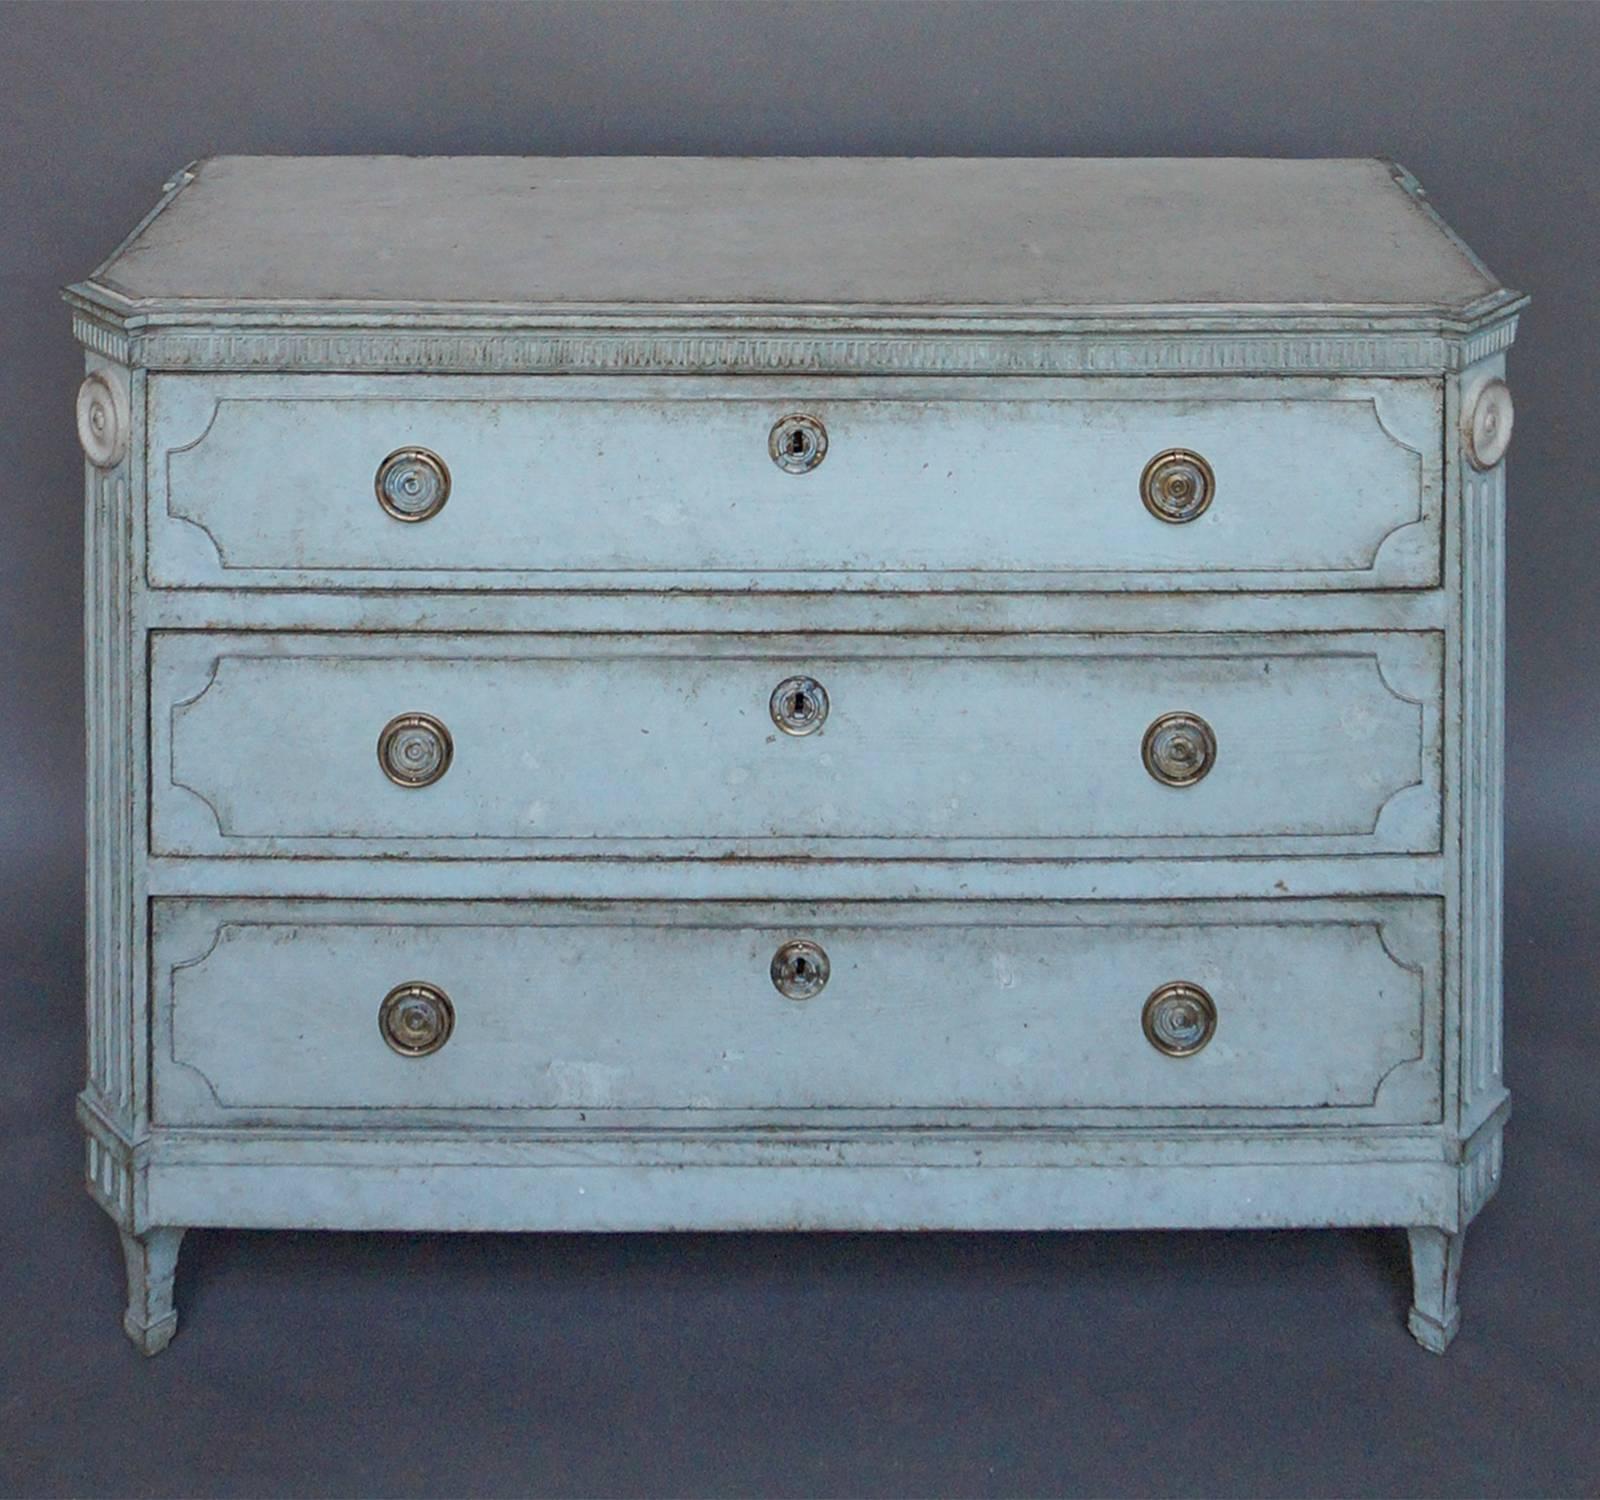 Chest of three-drawers, Sweden, circa 1840, in pale blue paint and with a reeded panel under the shaped top, canted corner posts with fluting, and raised panels on each drawer front. Brass pulls and escutcheons.